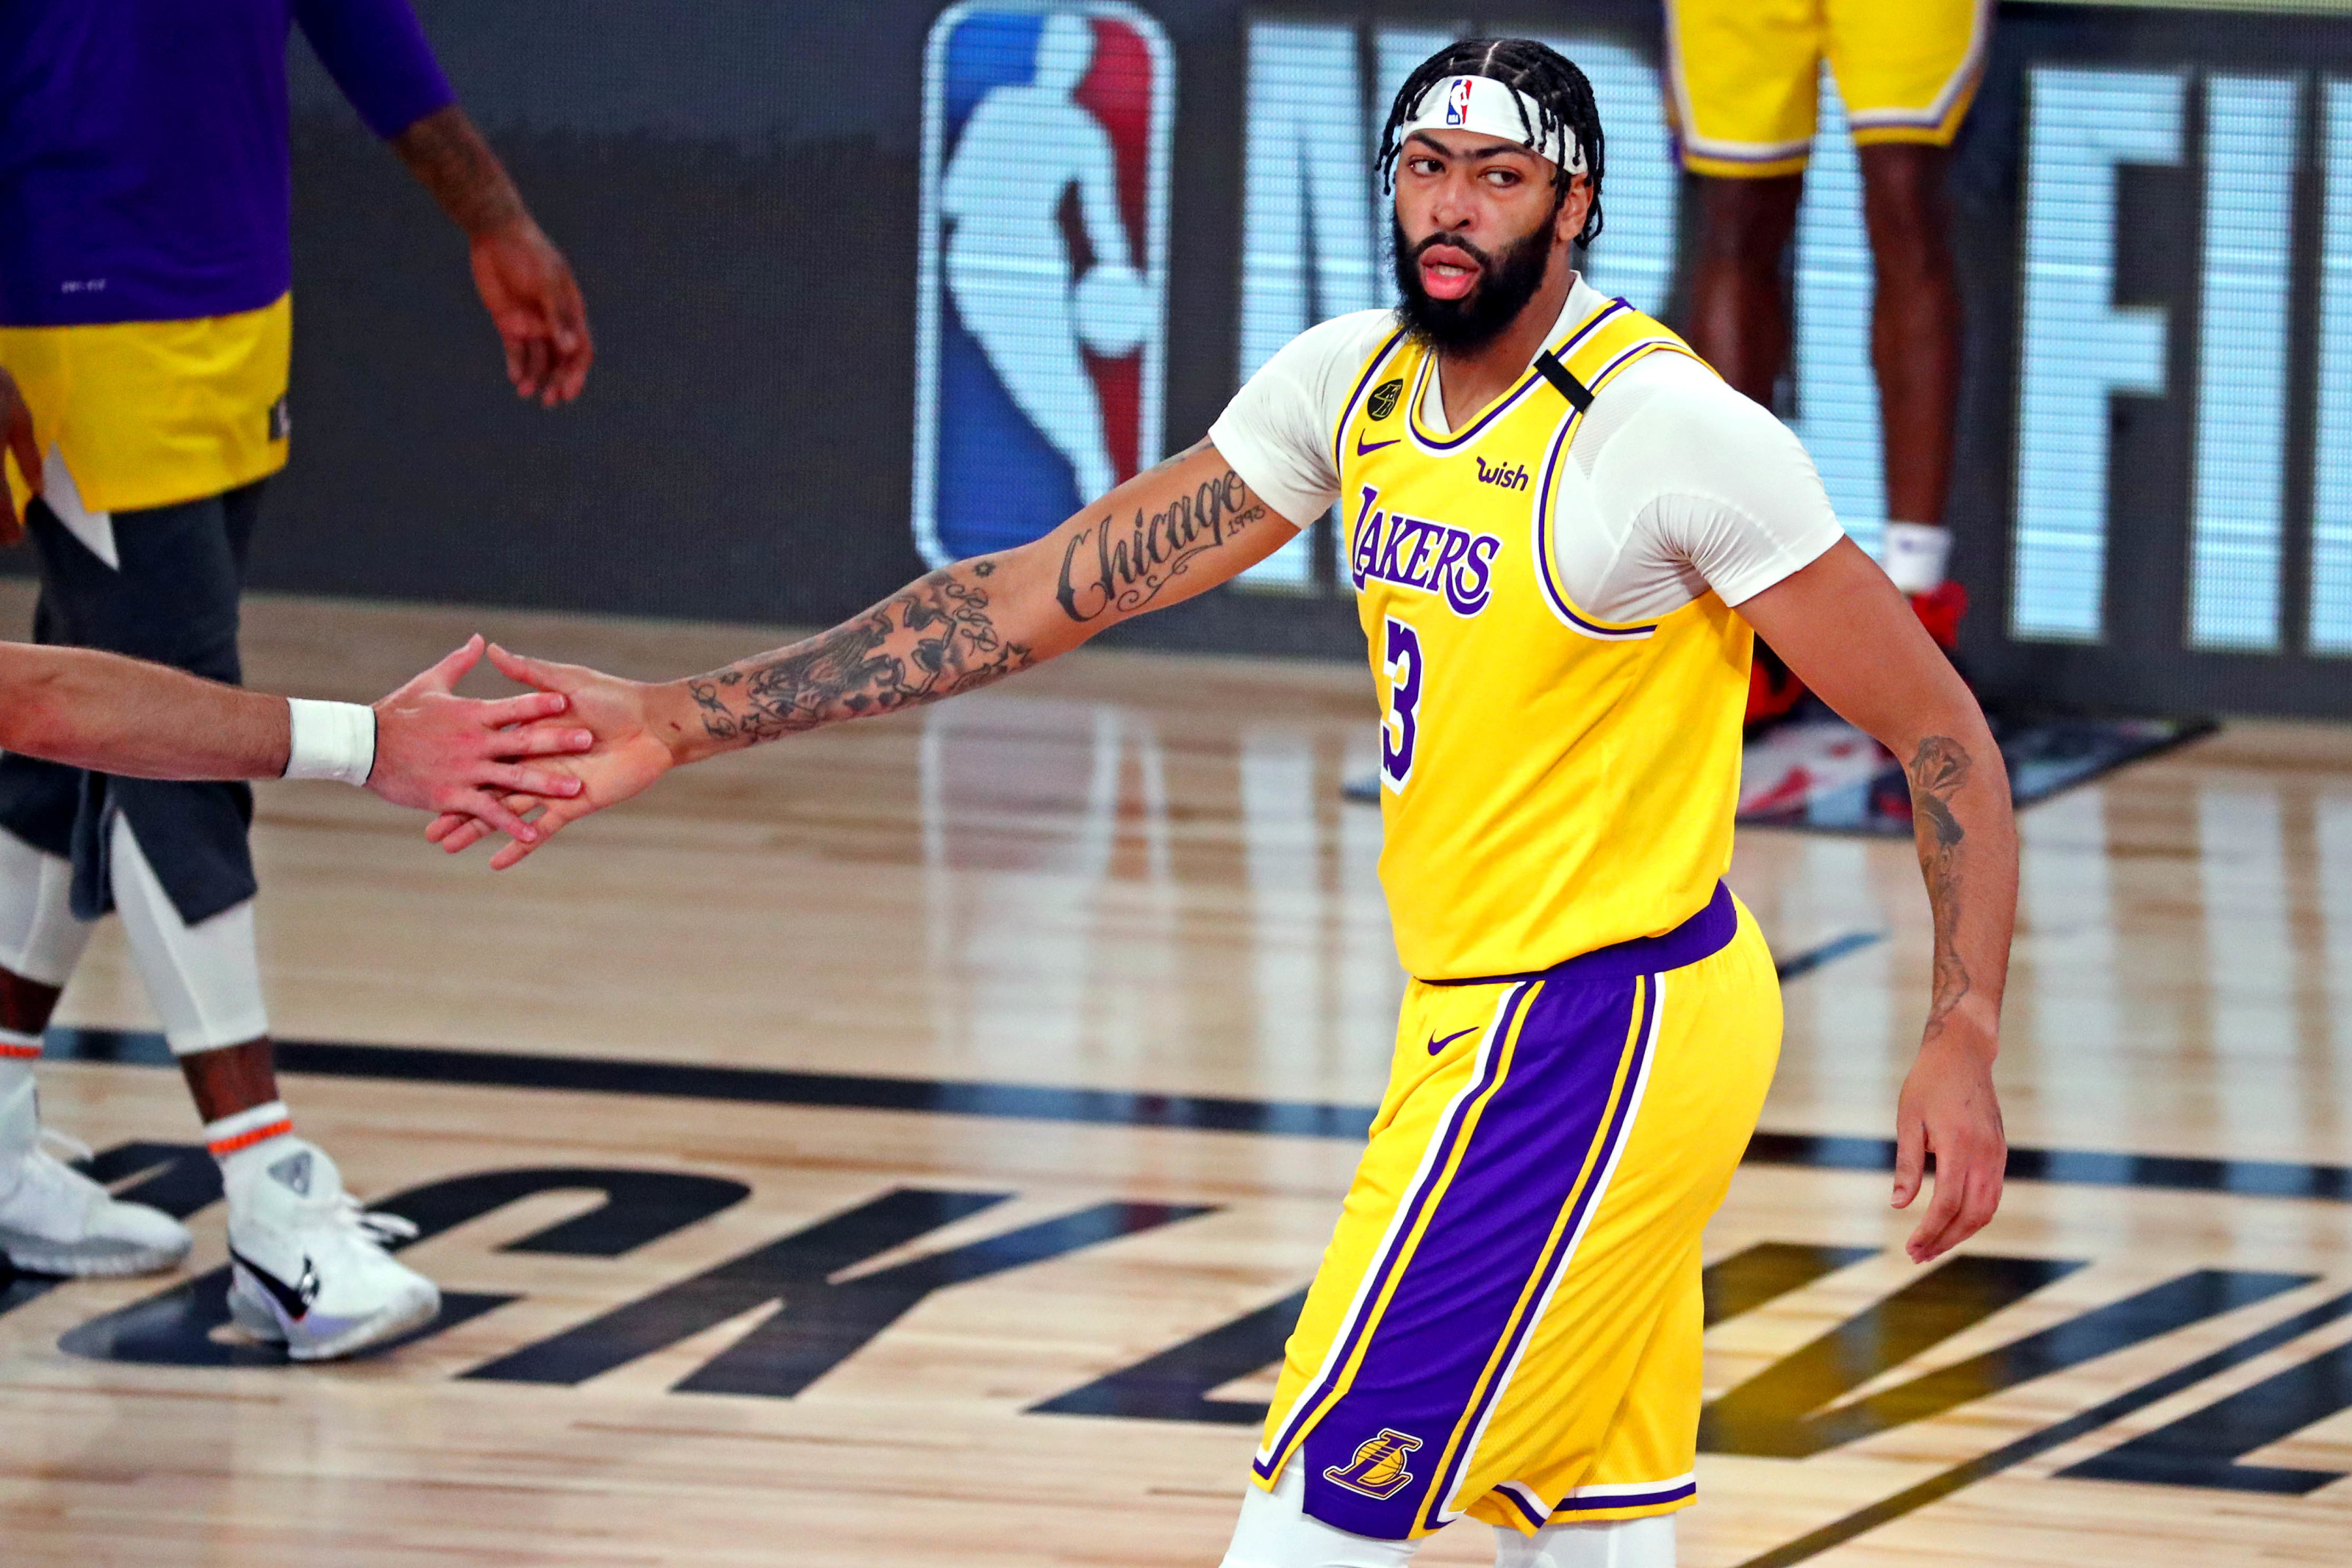 Anthony Davis Los Angeles Lakers City Edition - Limotees